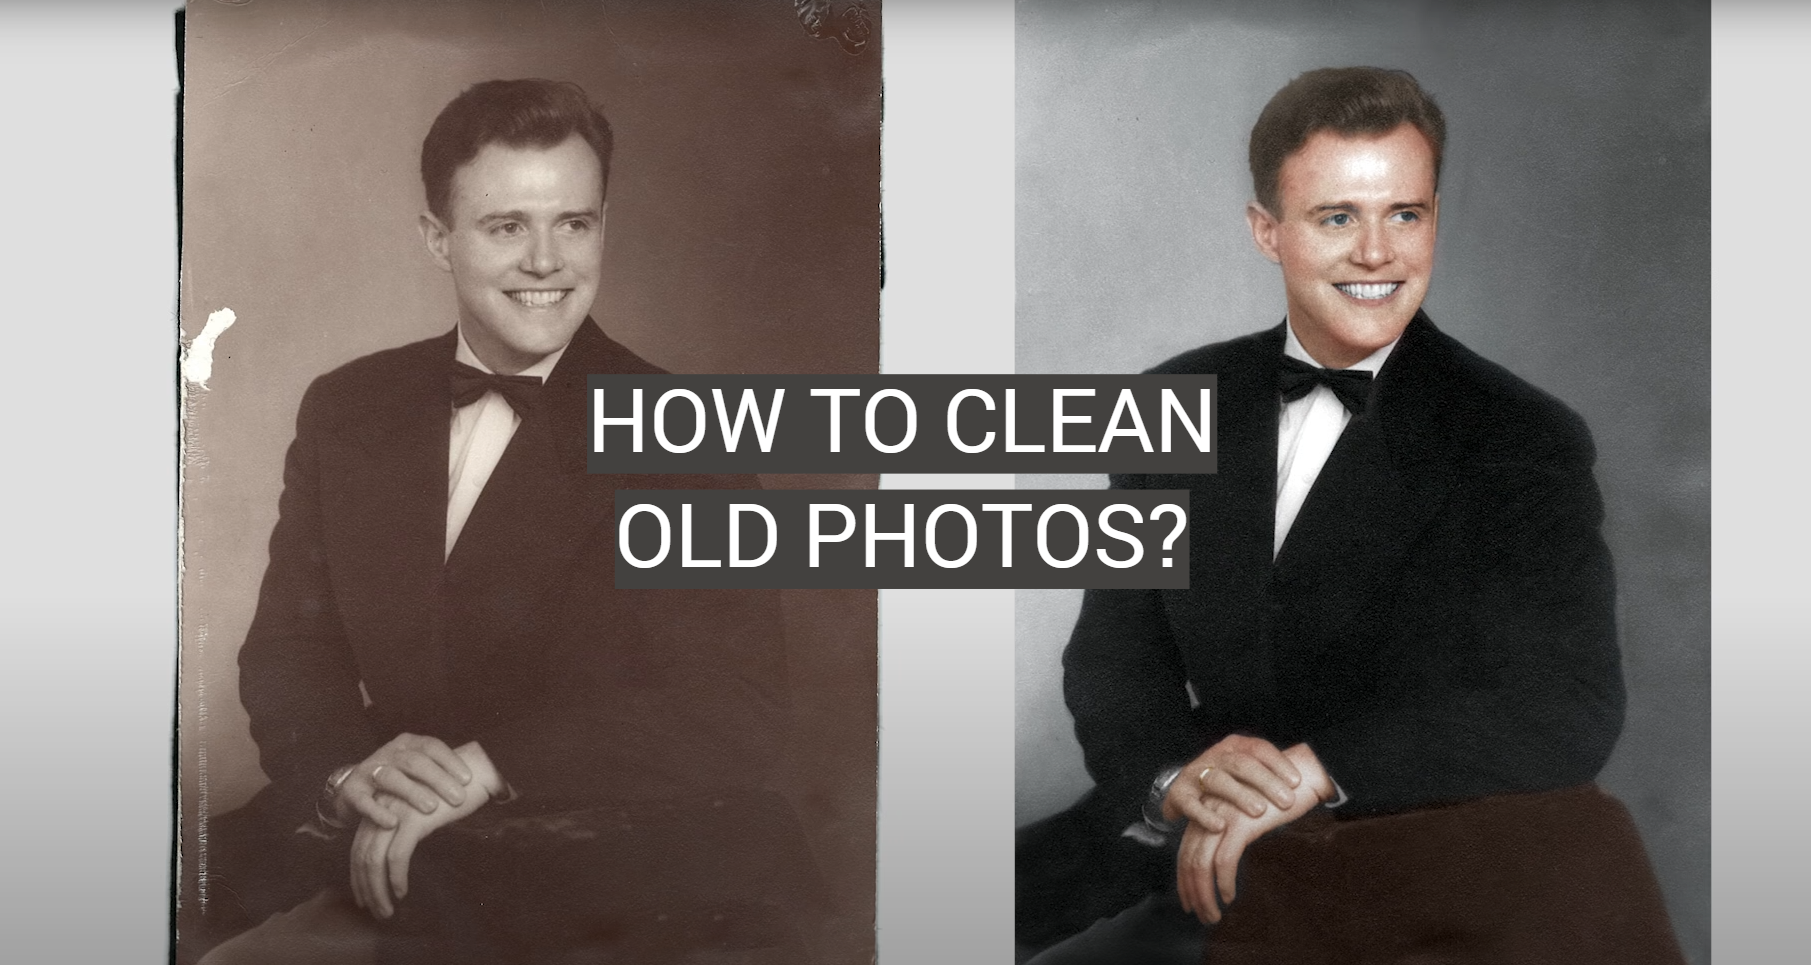 How to Clean Old Photos?